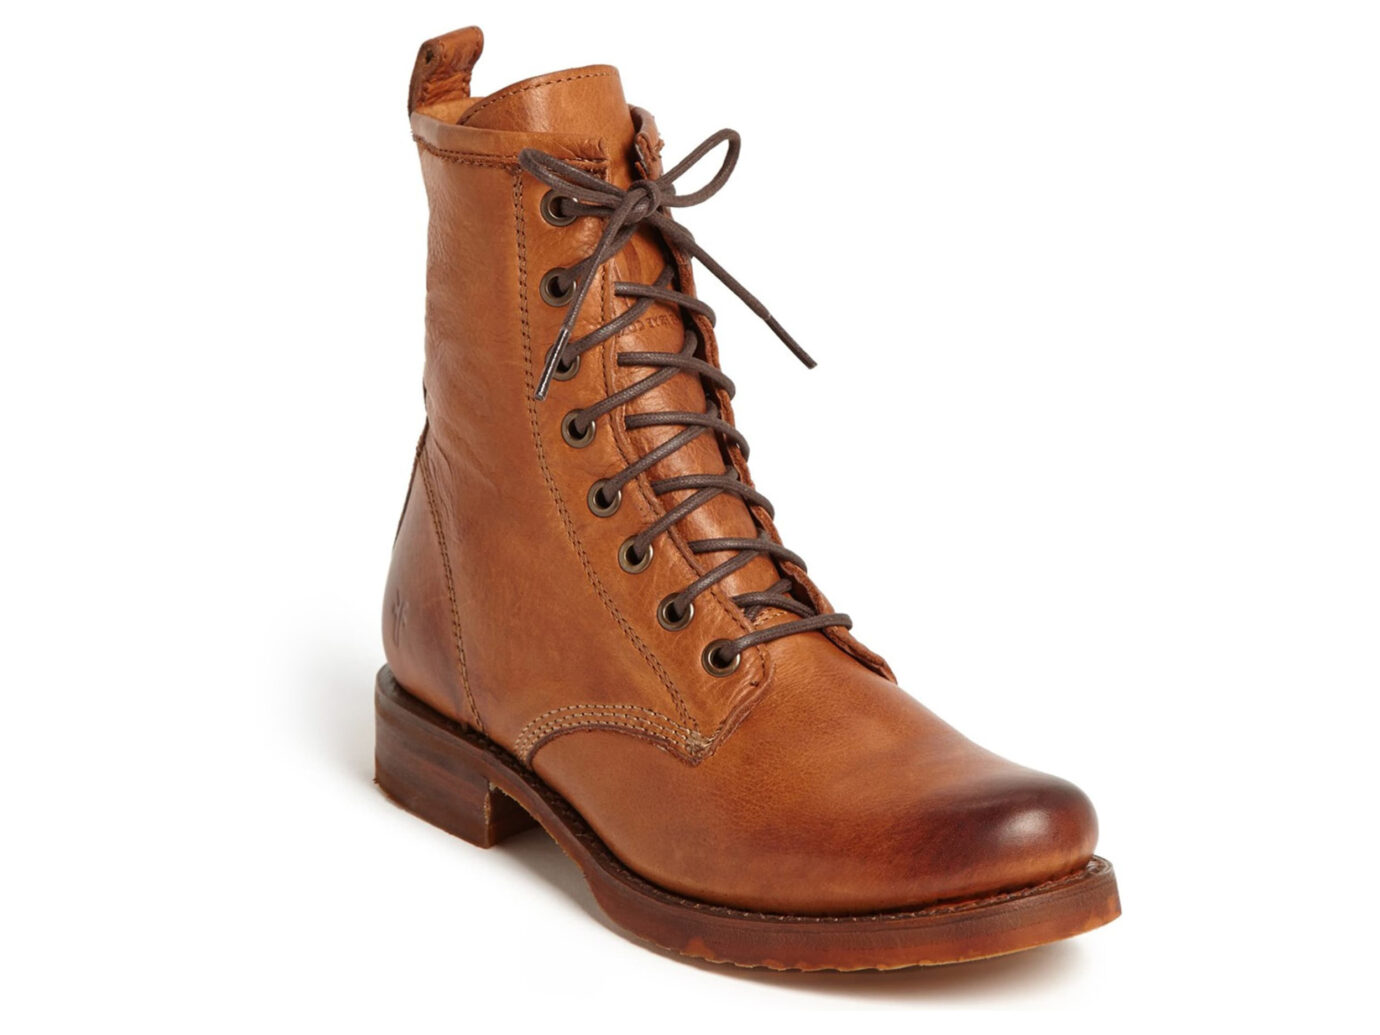 dress up boots for women